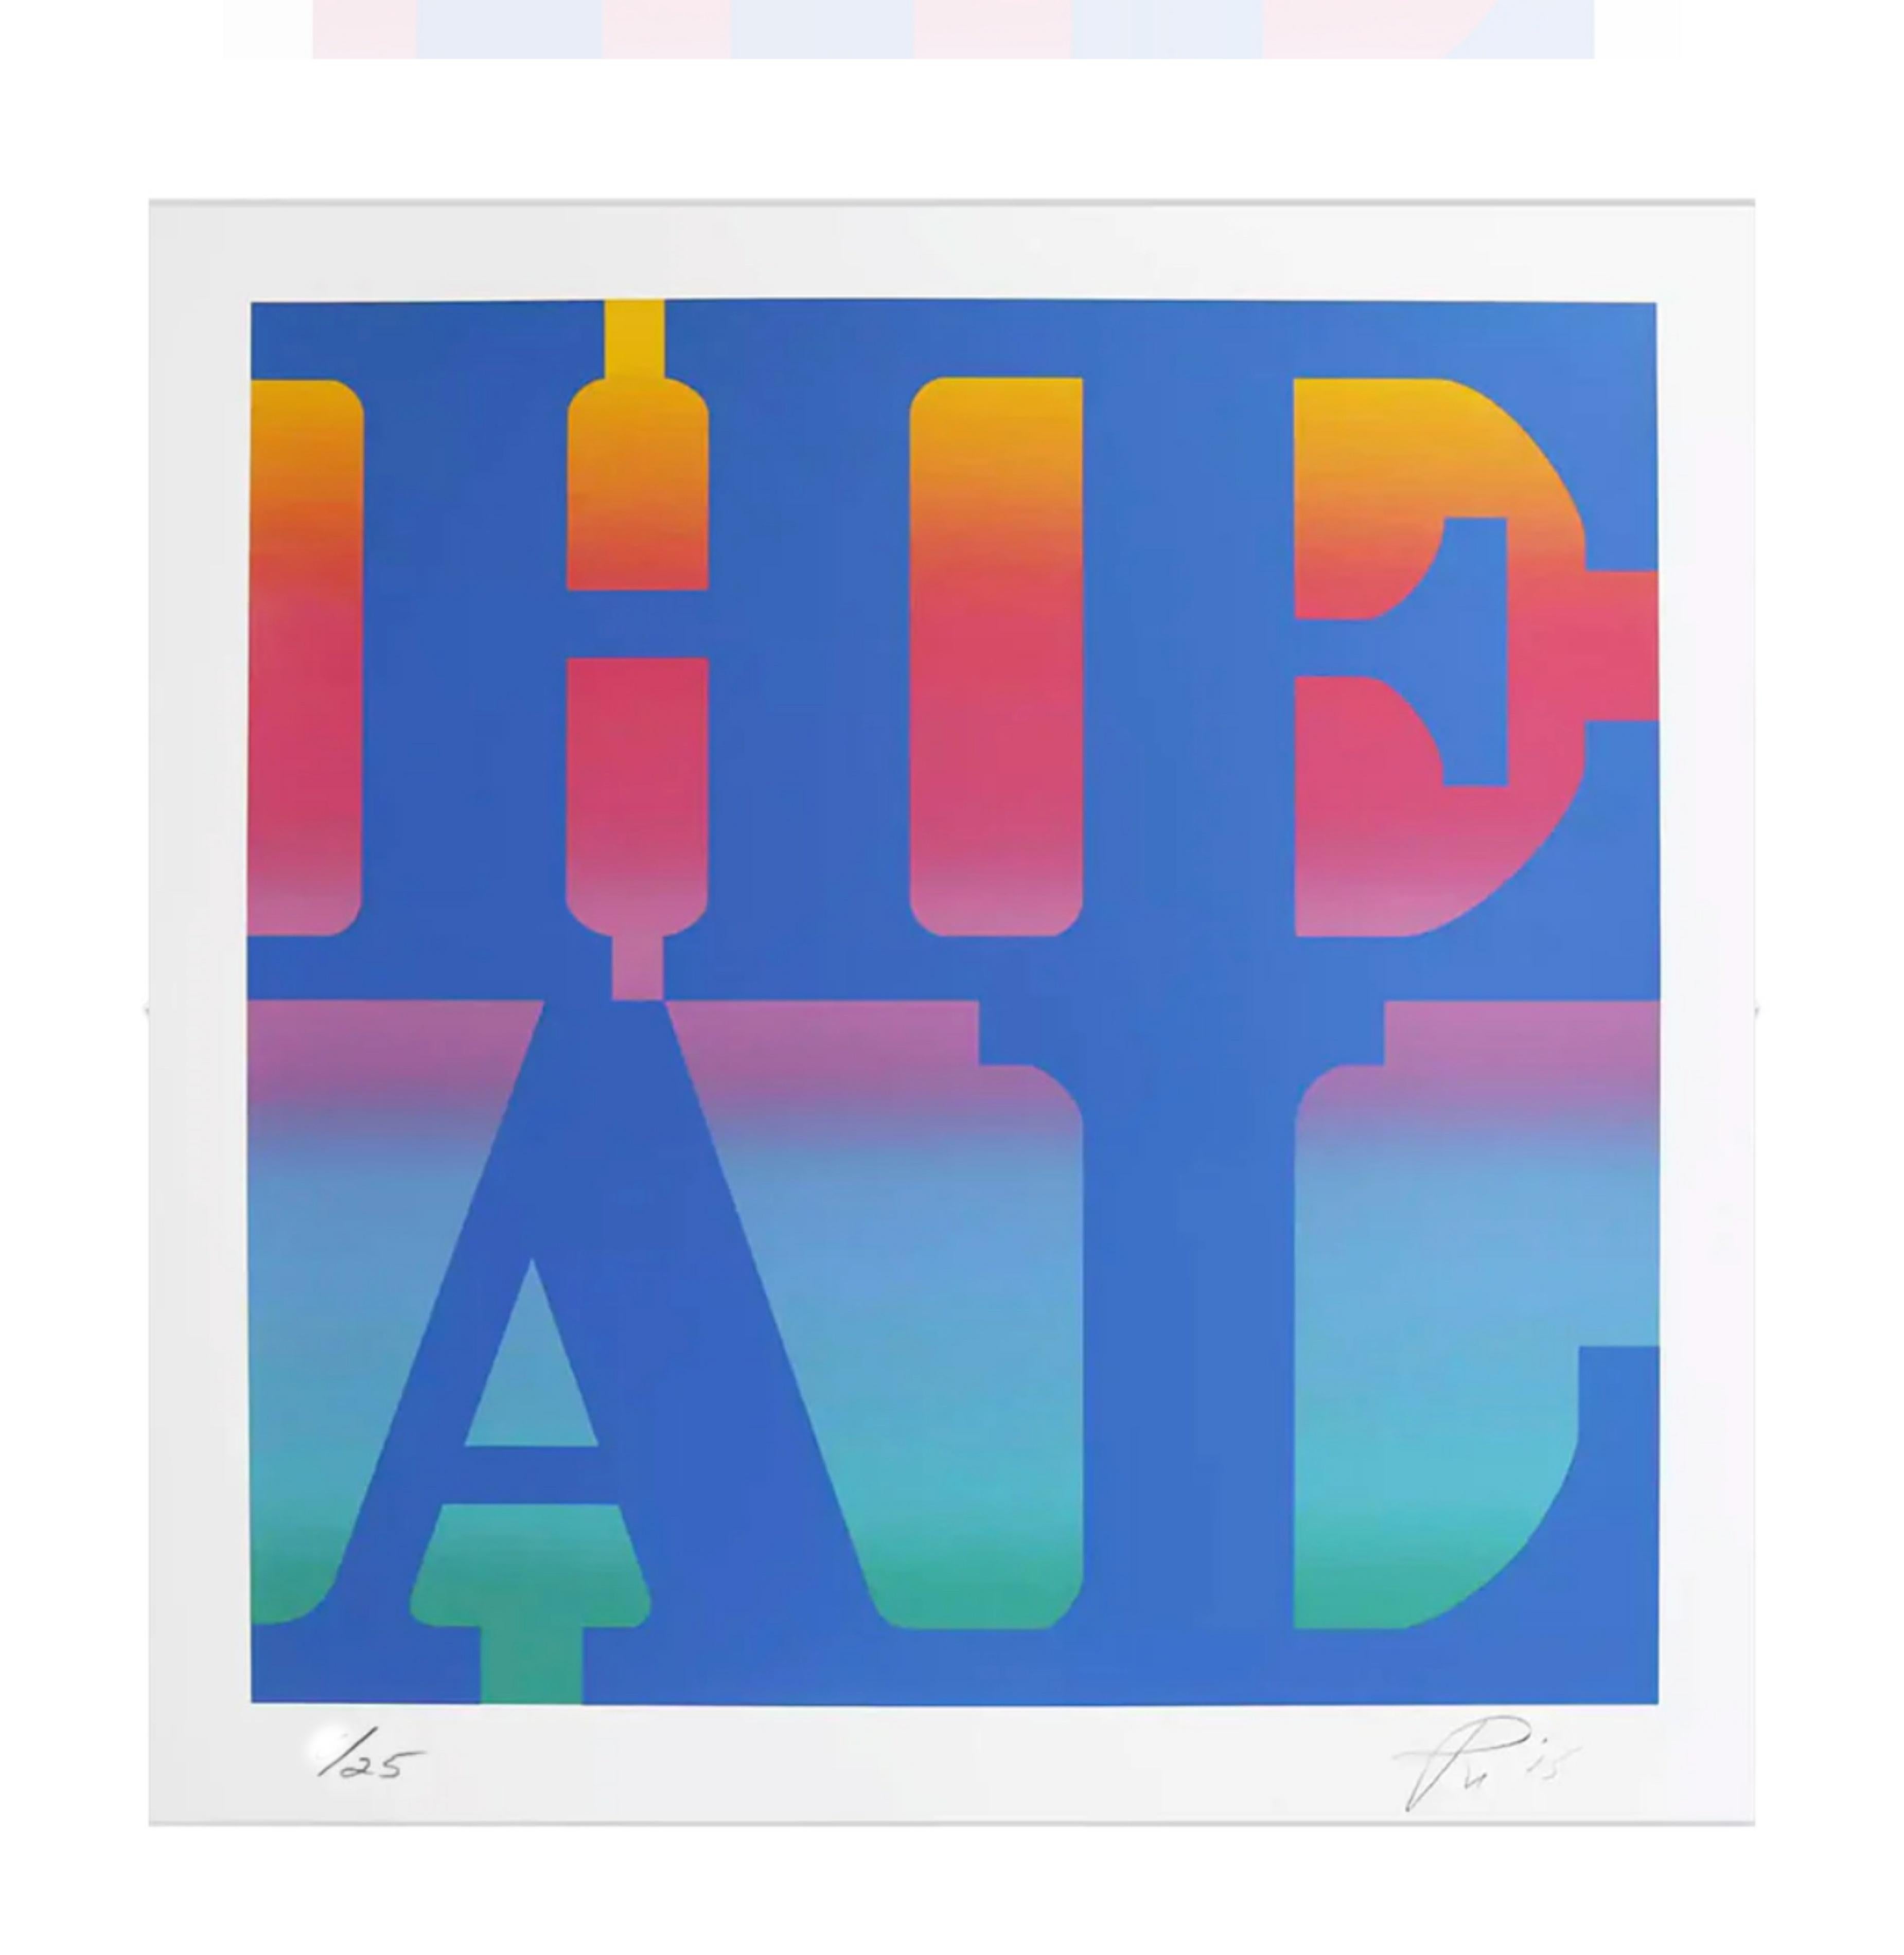 Robert Indiana
HEAL, 2015
Silkscreen on 2ply Rising Museum Board
Signed, dated and numbered 5/25 on the front
This is one of the last works the artist personally signed before he passed away; the message HEAL was very personal to him - and one that